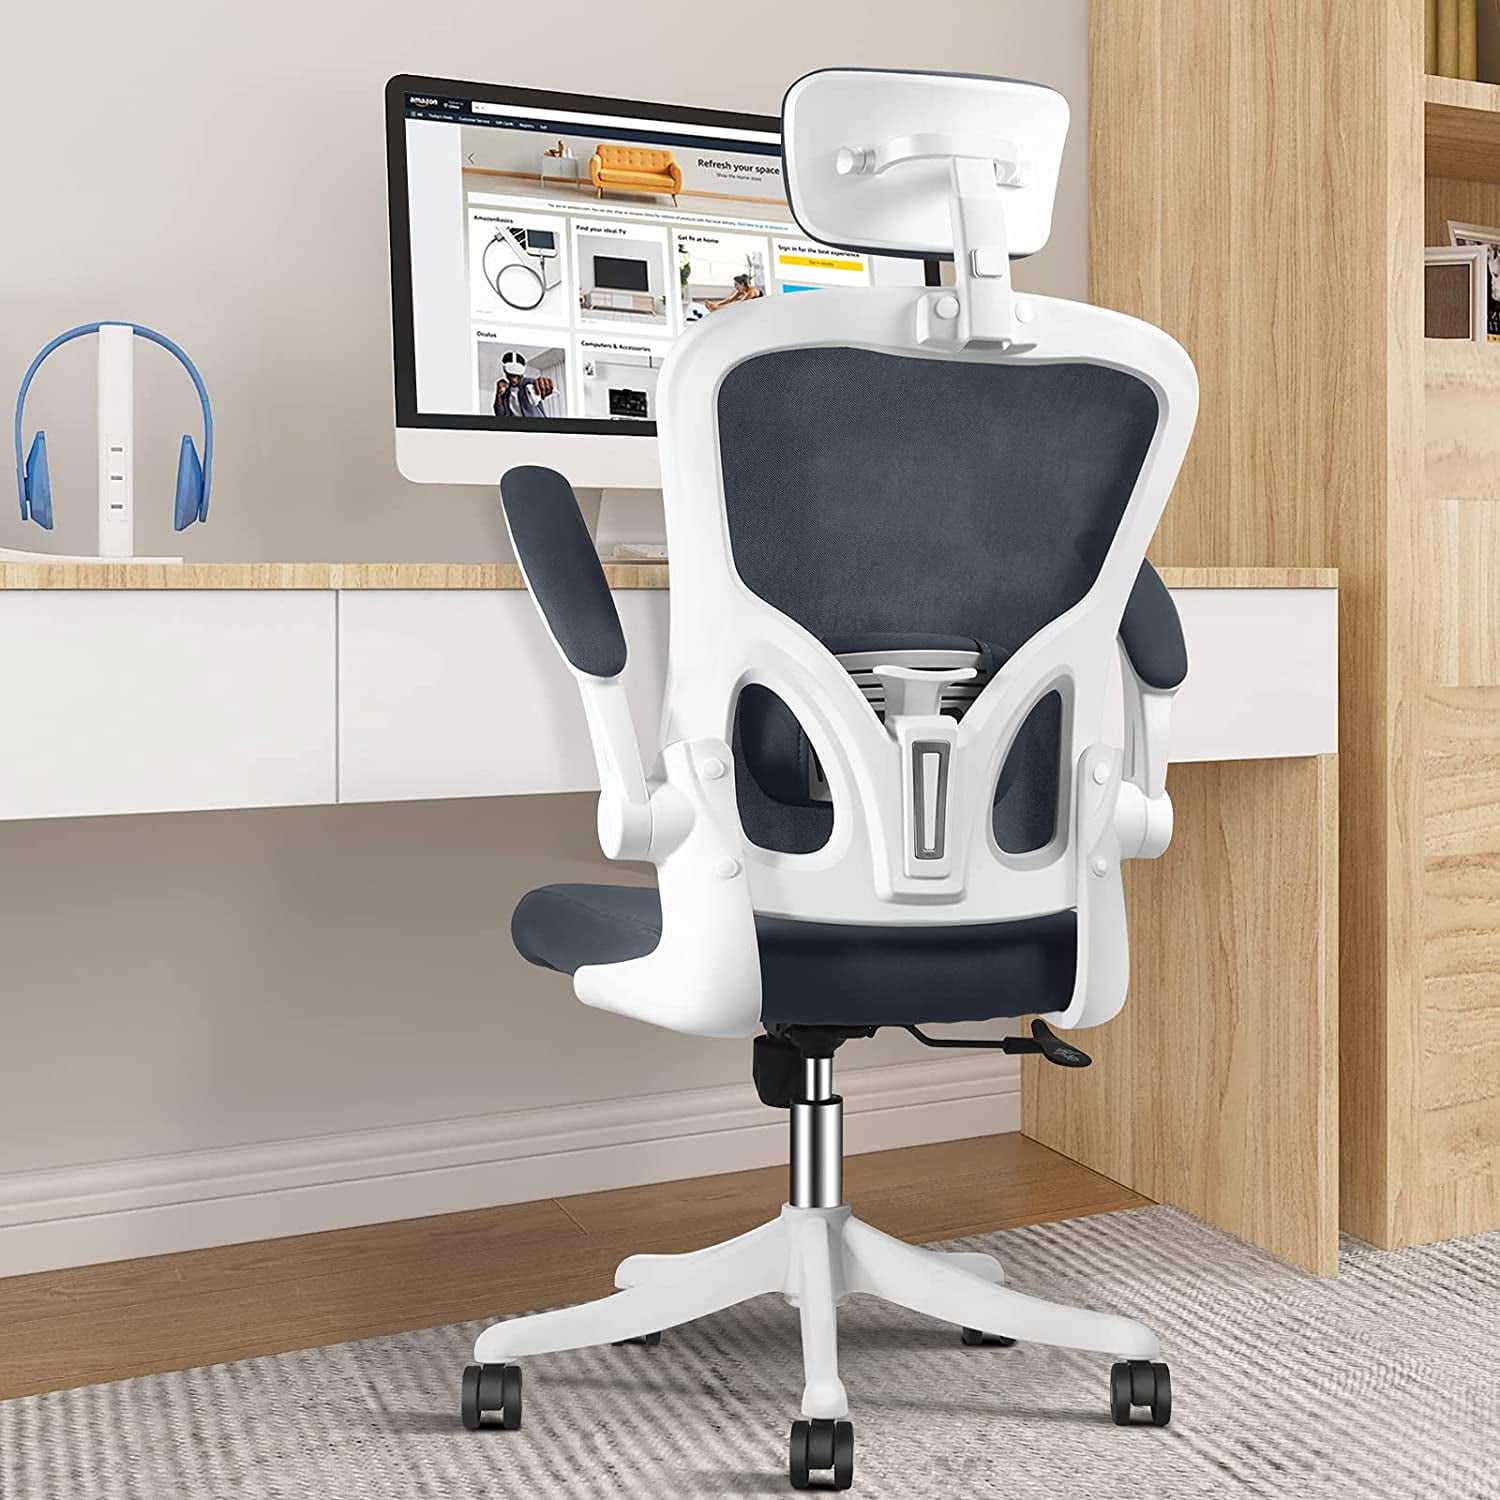 Details about   Adjustable Ergonomic Mesh home Office Chair Swivel Computer Desk Task seating 